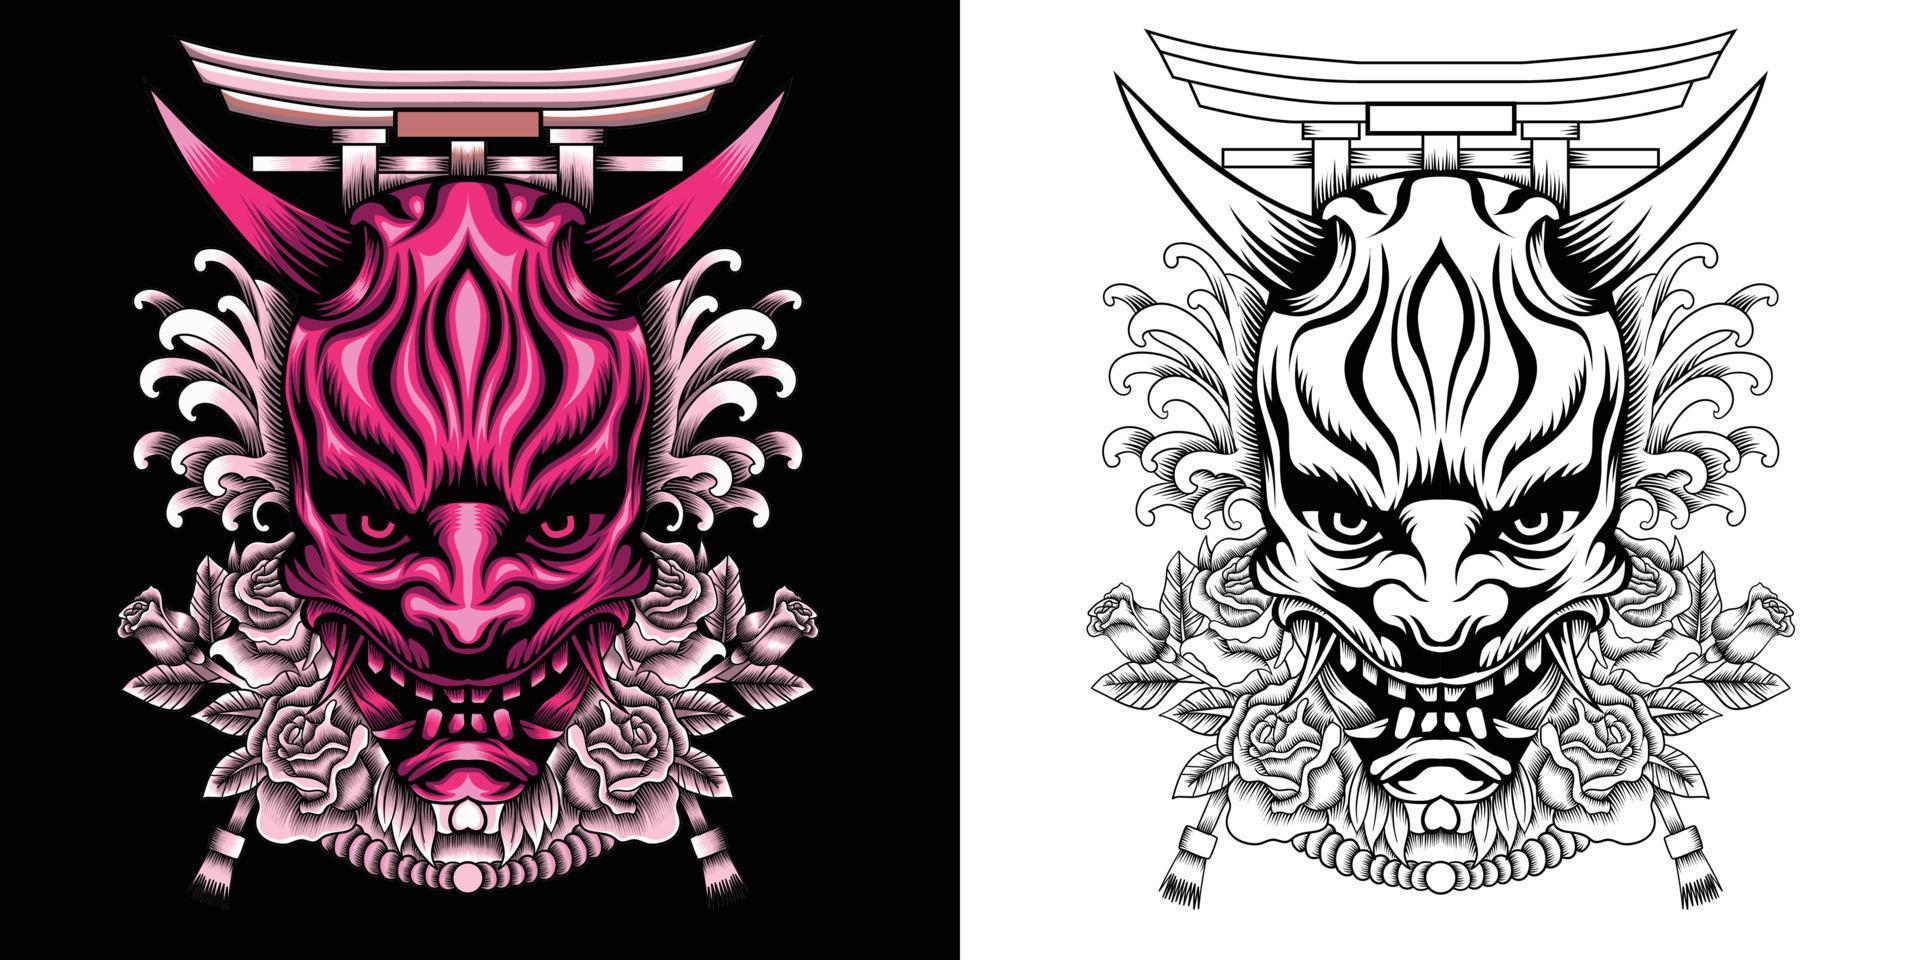 oni mask with roses and tori gate illustration vector